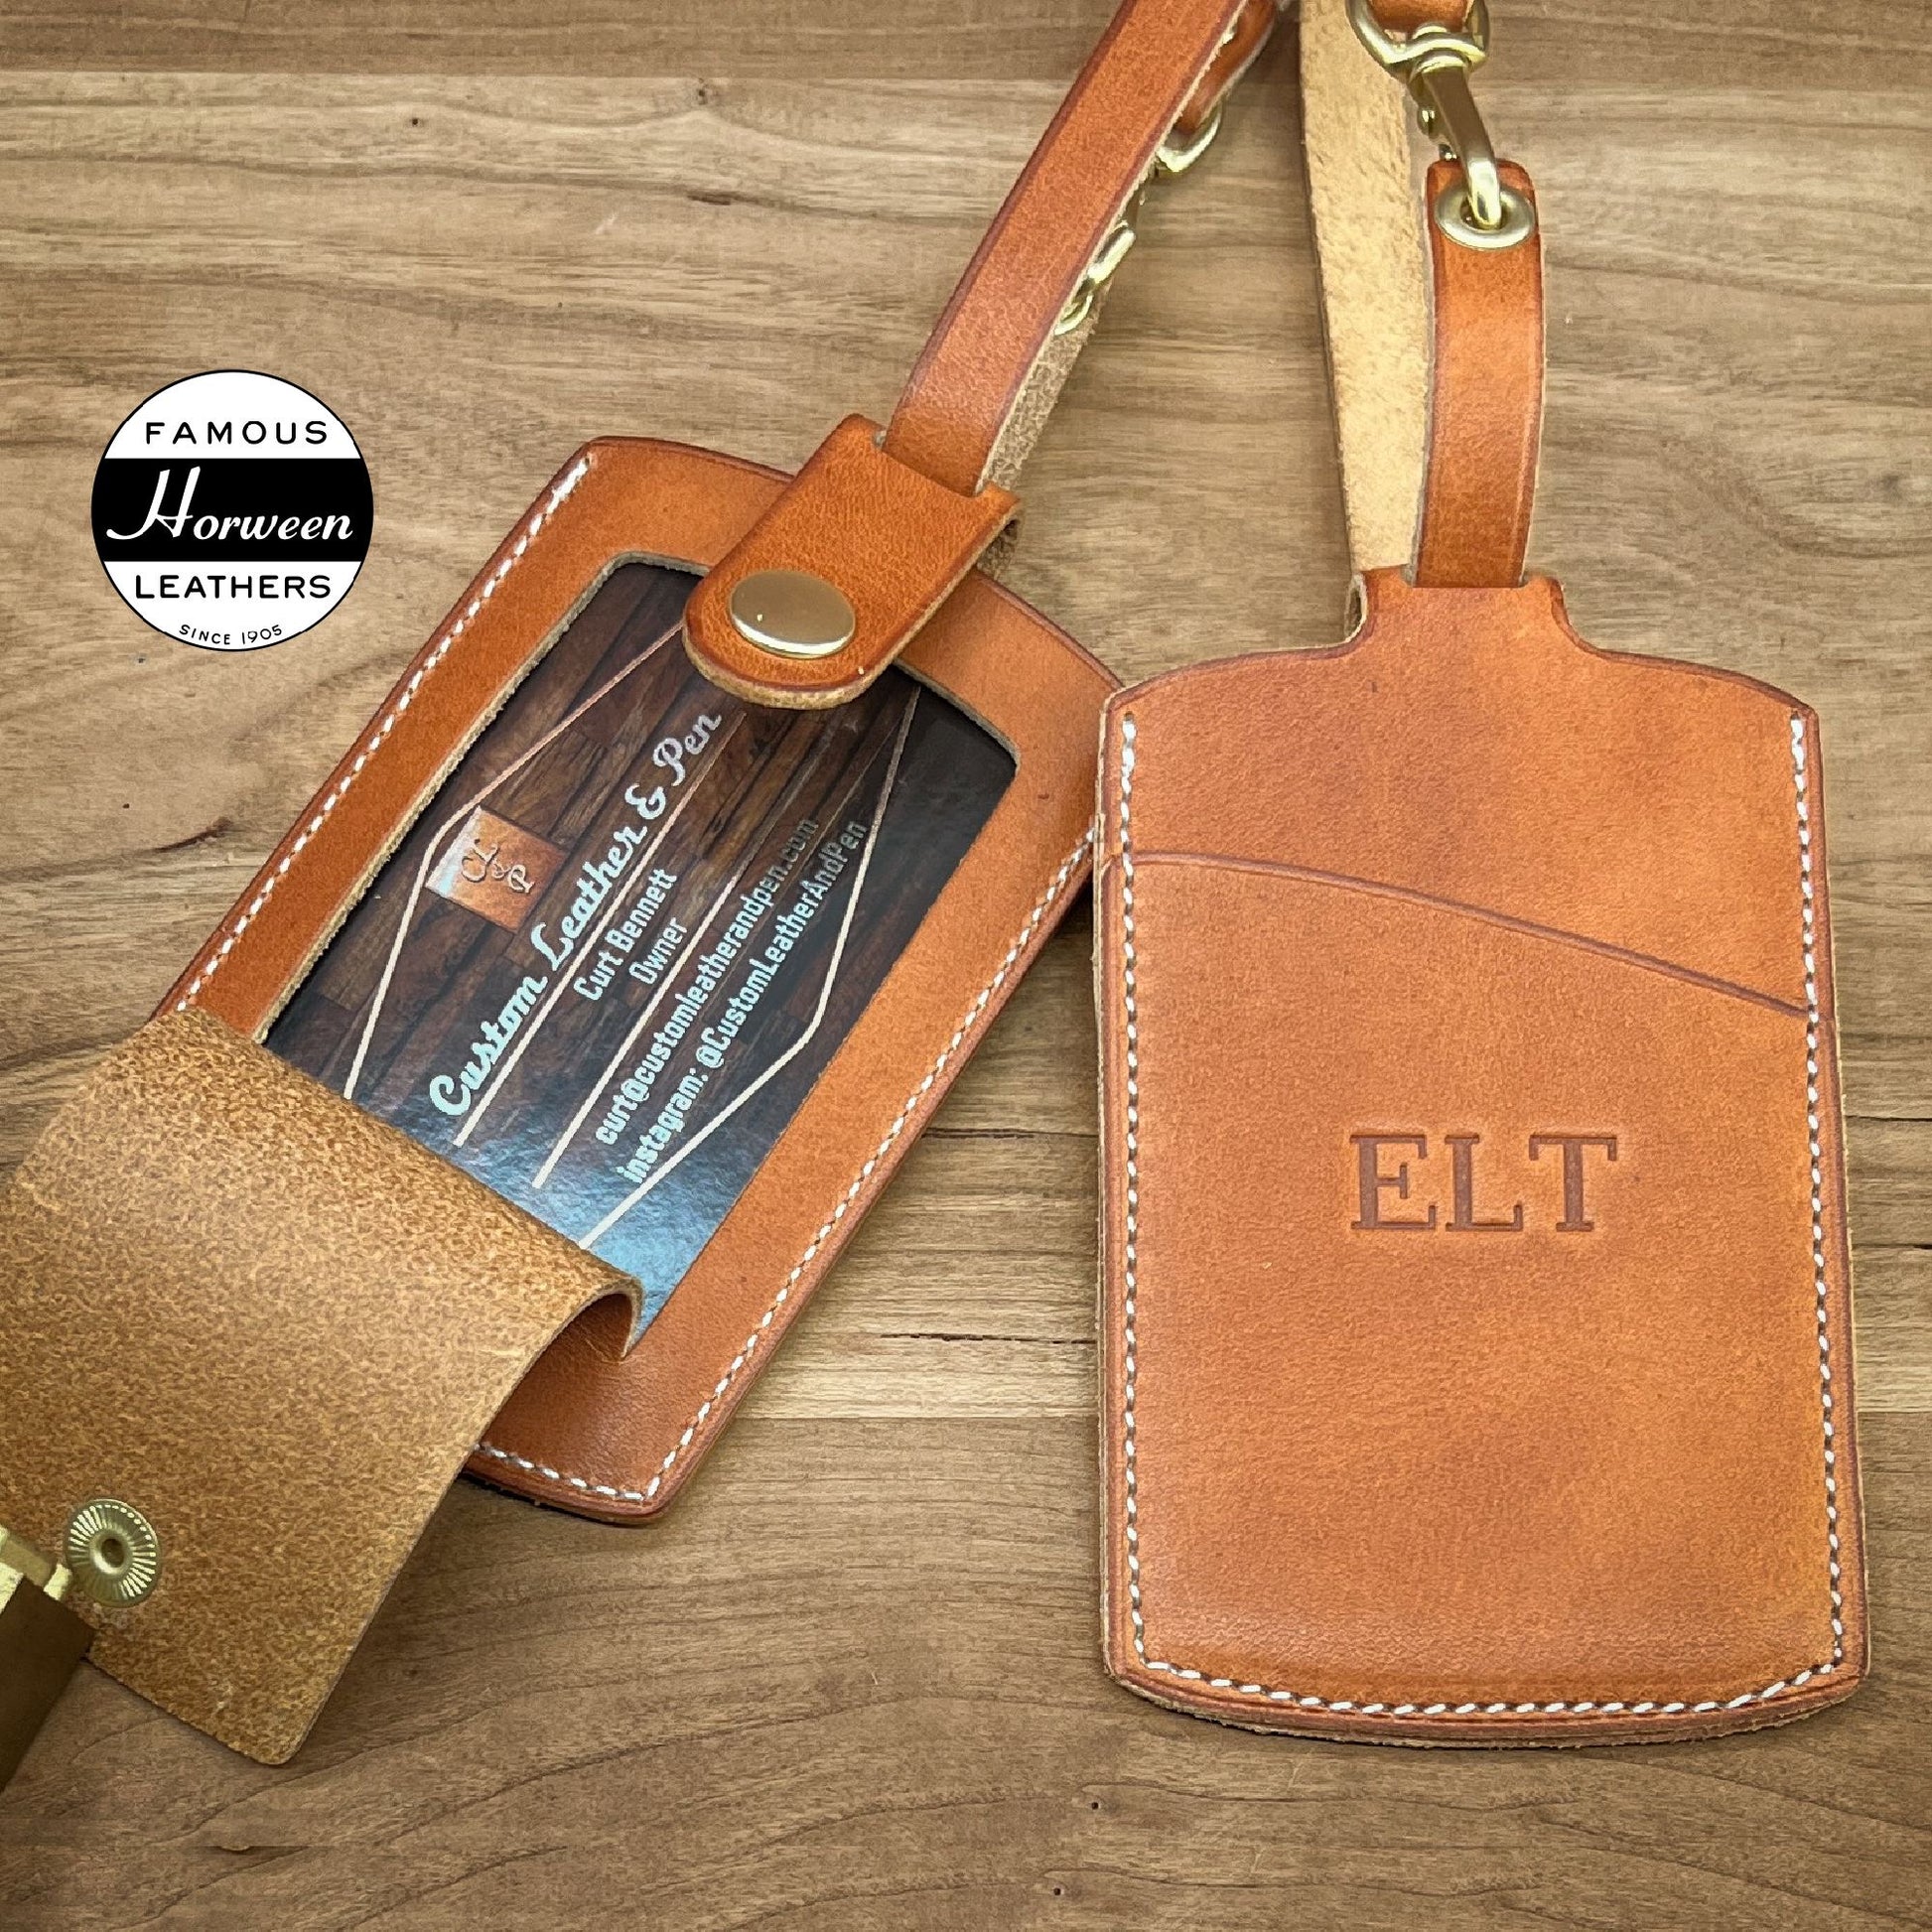 Personalized Horween Leather Luggage Tags  Custom made to order in Houston, Texas by Custom Leather and Pen